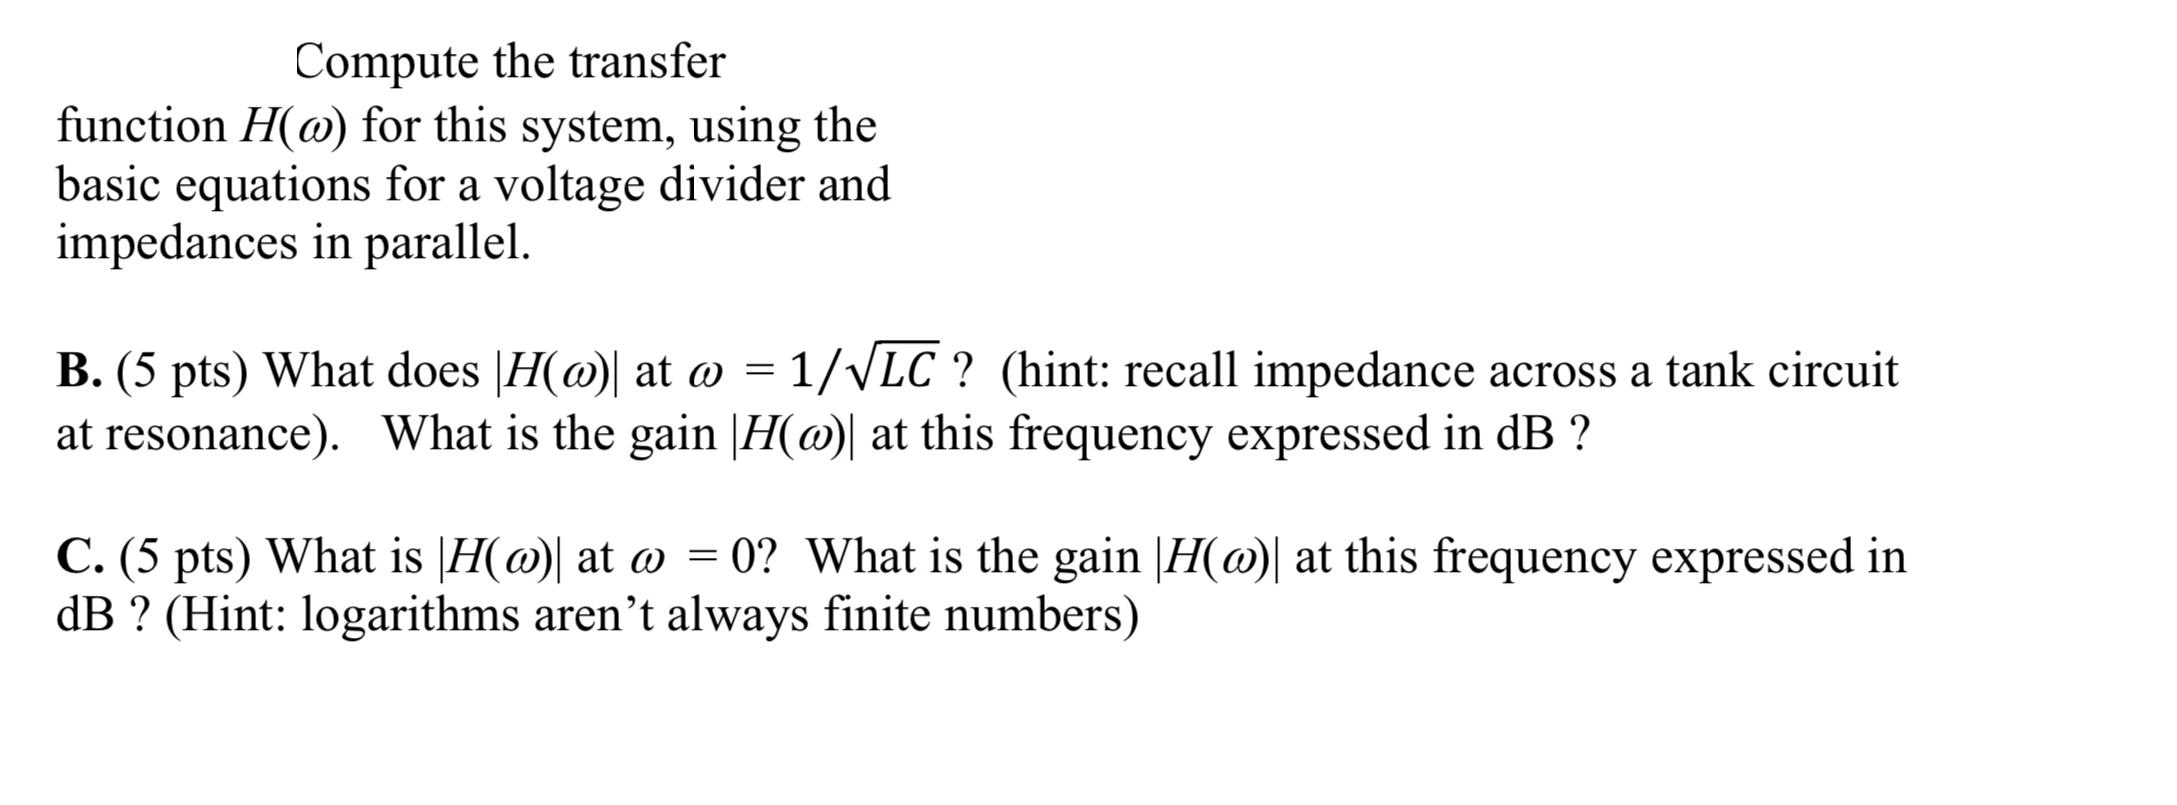 Compute the transfer function H(o) for this system, using the basic equations for a voltage divider and